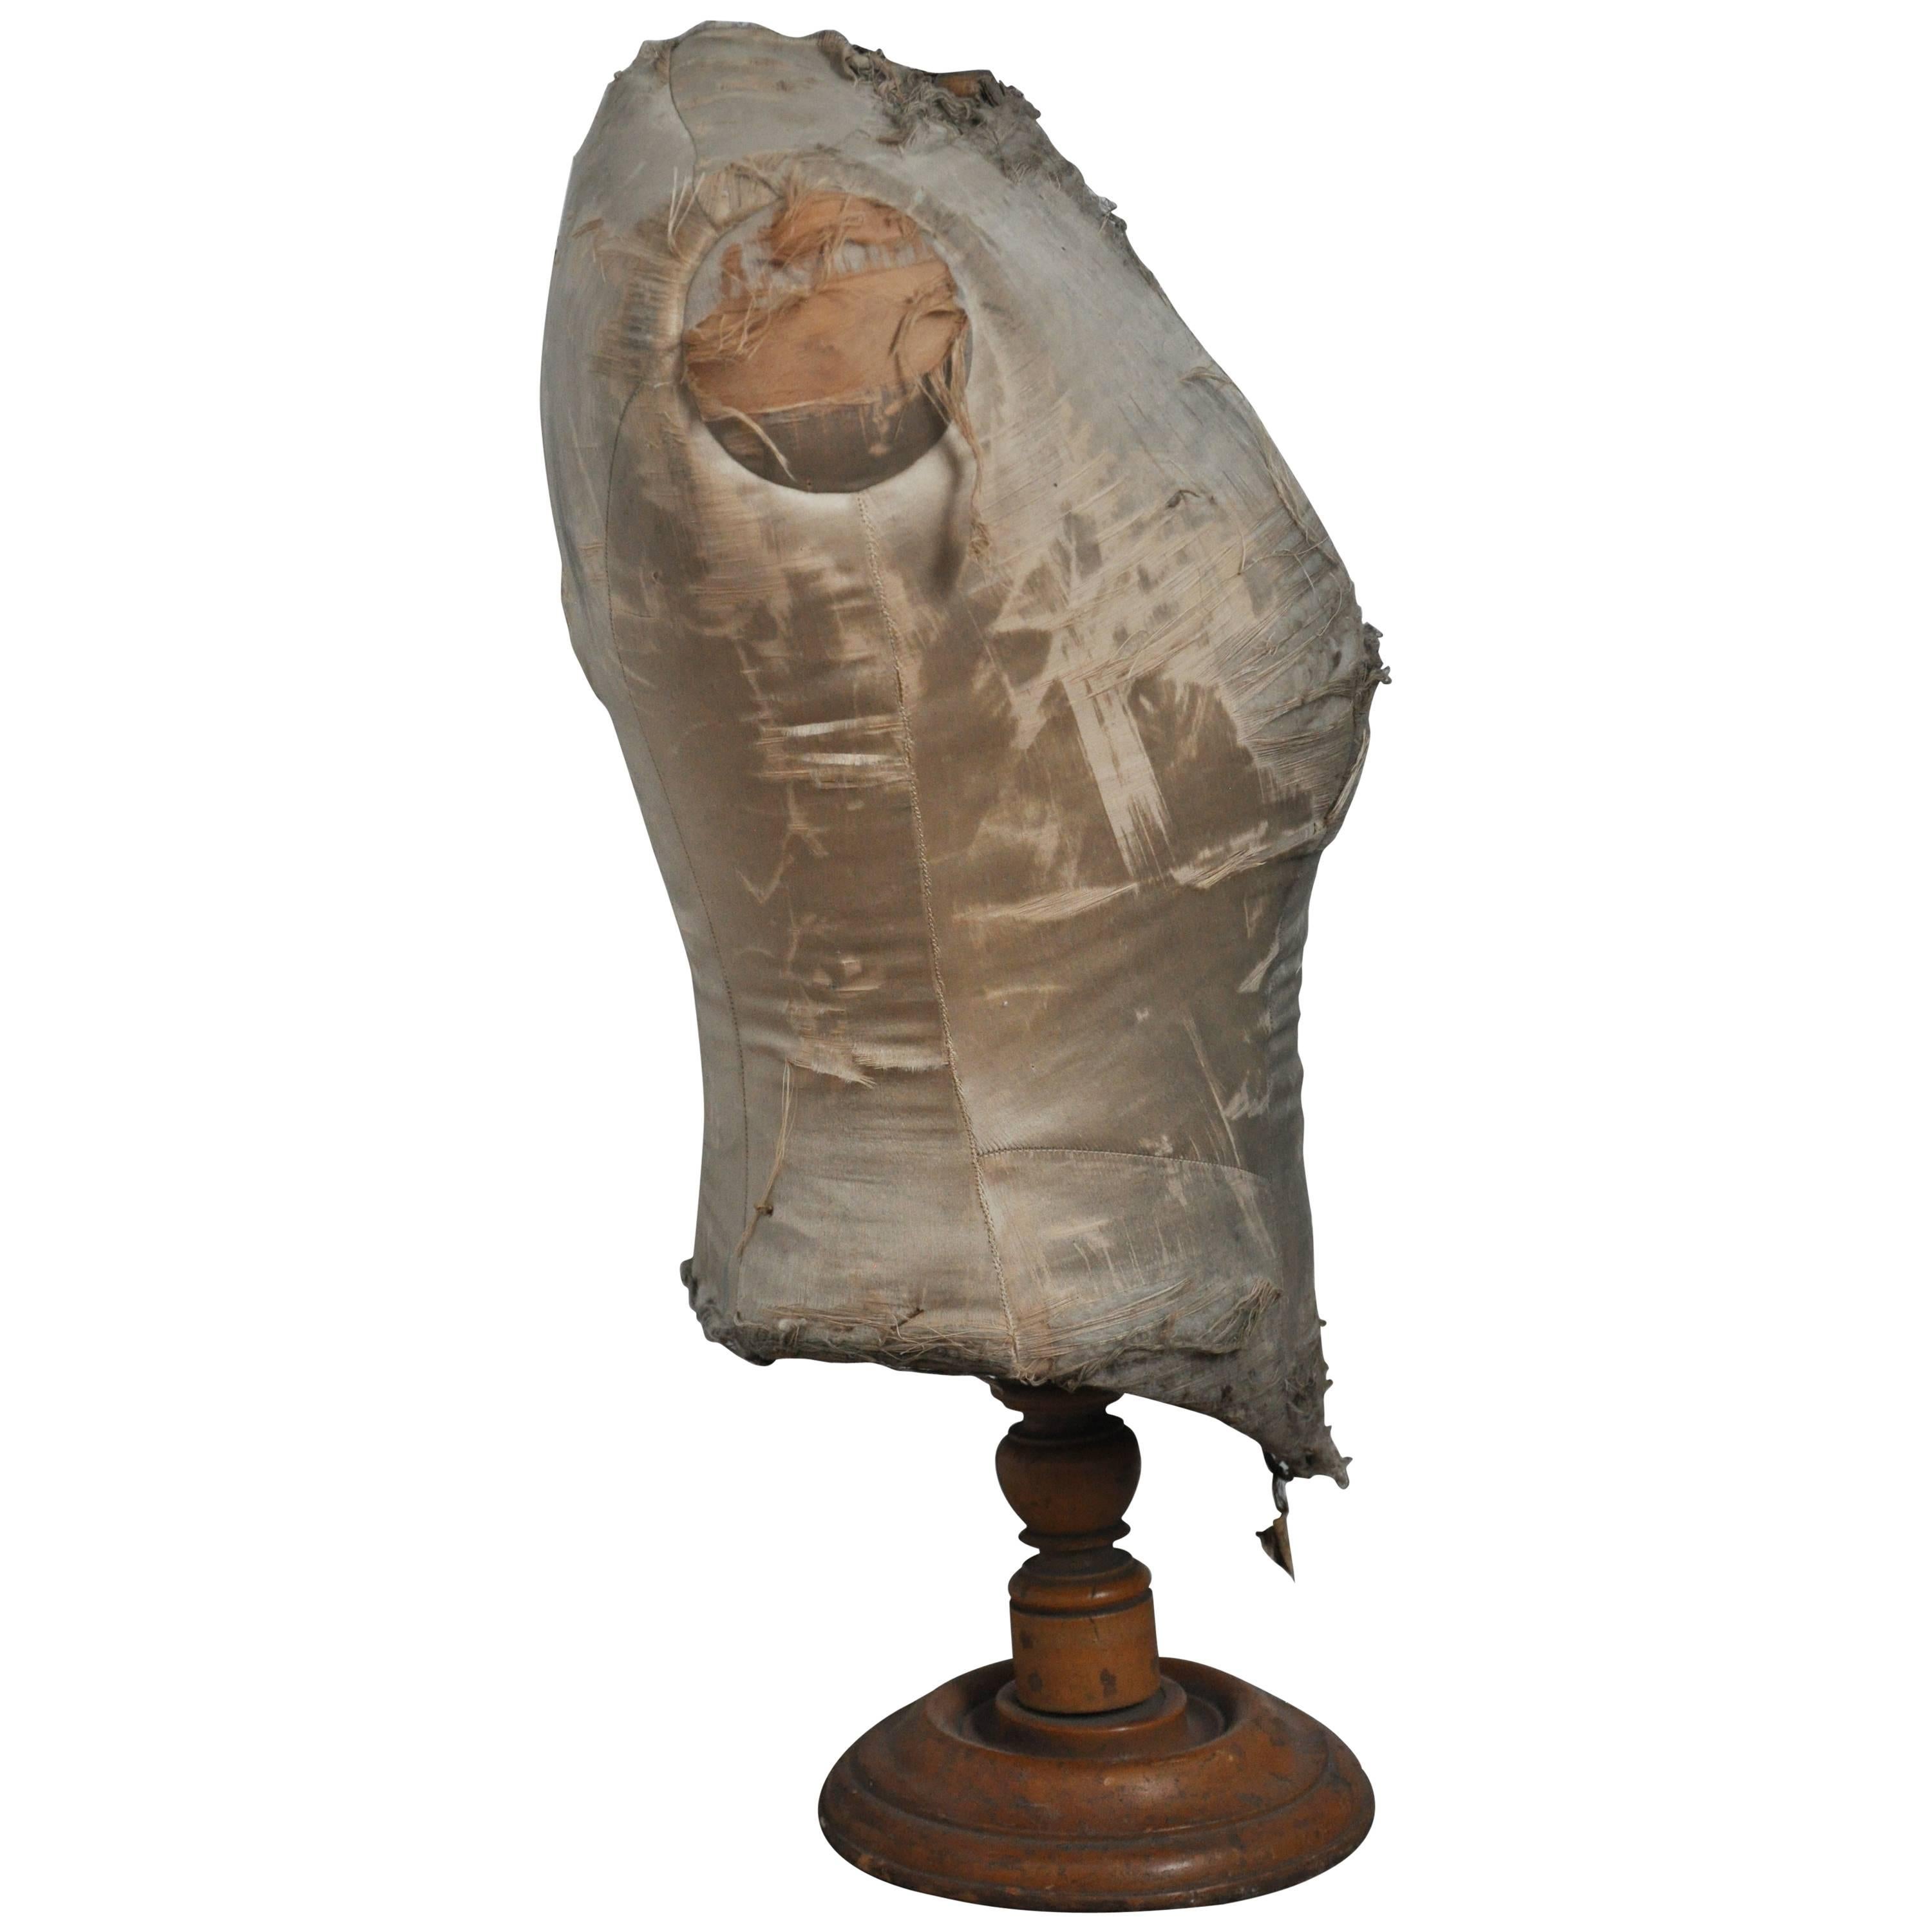 Late 19th century French Fabric Bust. 
Antique bust found in Paris was a shop display and is now a fantastic object with a rich and gorgeous patina. 
Turned wood base and original linen upholstery which is tattered and torn.

Dimensions: 16